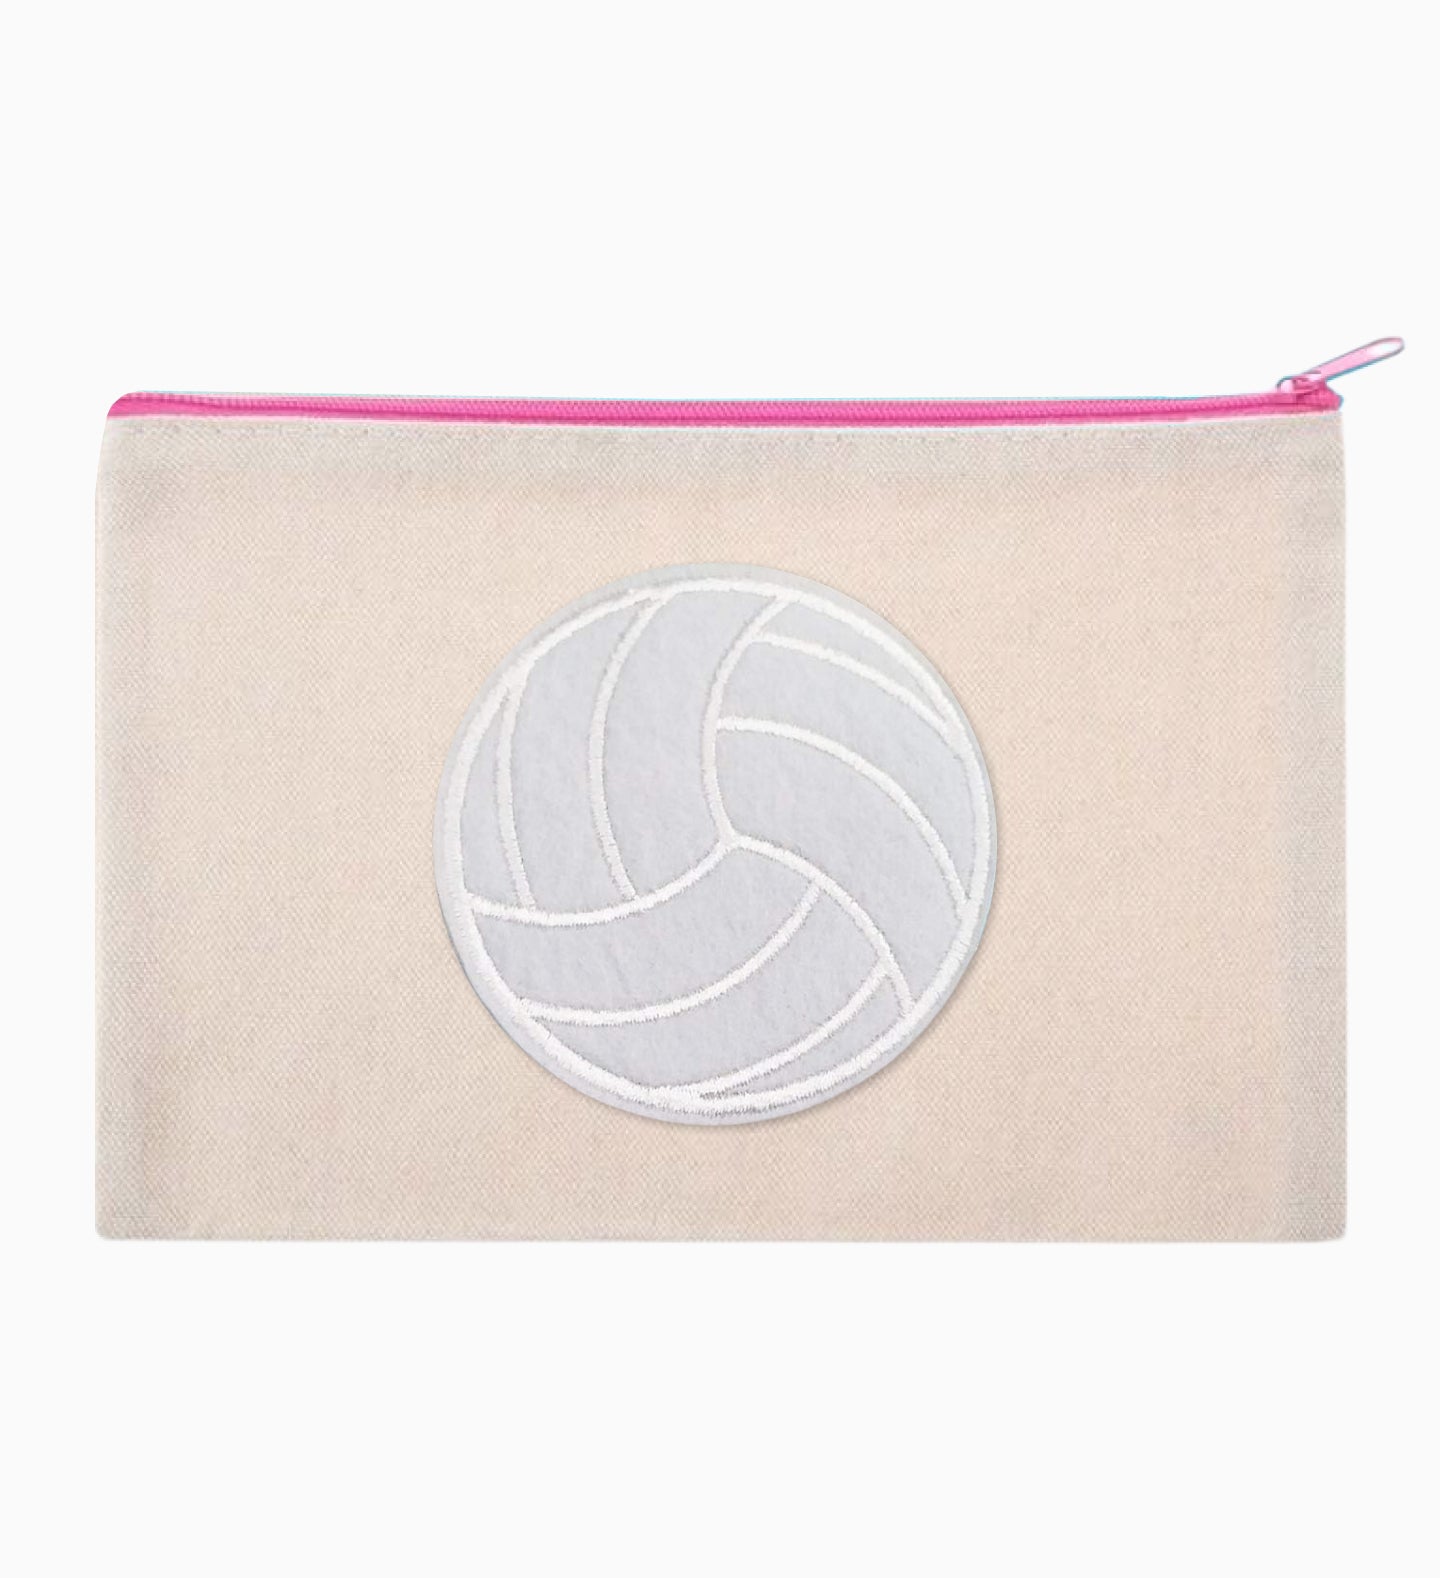 Volleyball Patch Travel/Toiletry/Cosmetic Bag